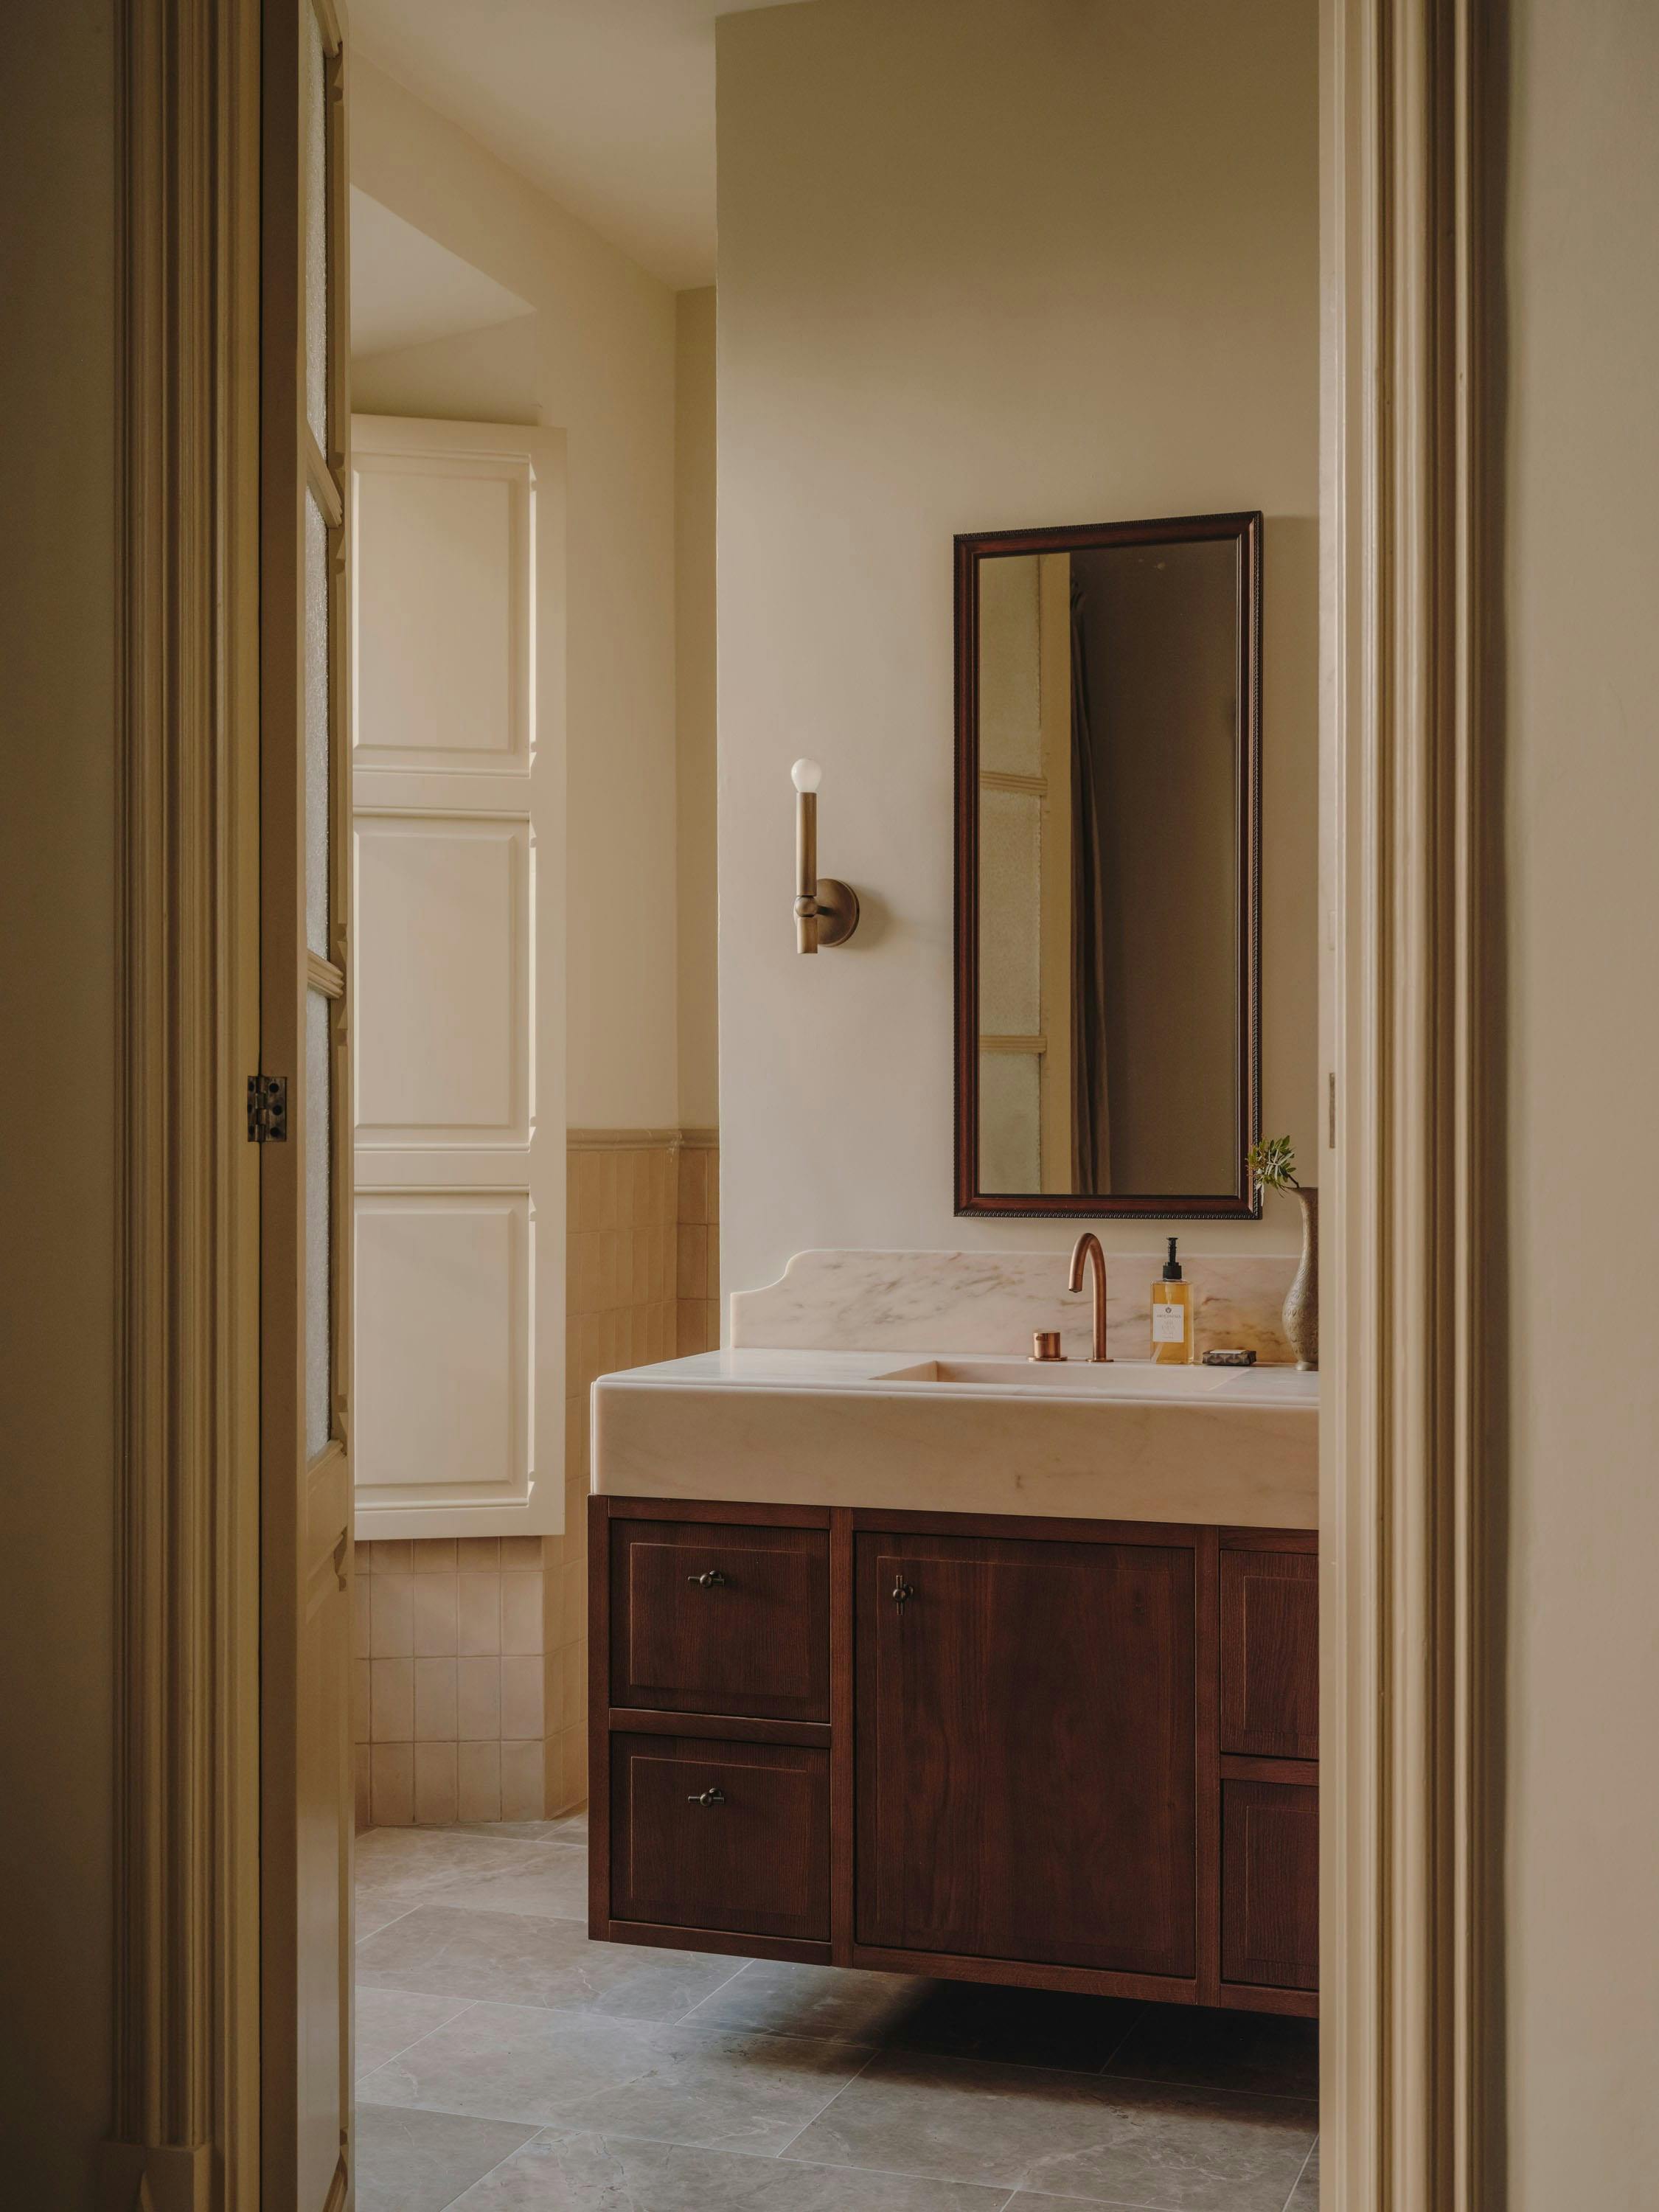 The image features a bathroom with a large sink and a mirror above it. The sink is situated in the center of the room, and the mirror is placed above it. The bathroom appears to be clean and well-maintained.

In addition to the sink and mirror, there are two bottles placed on the countertop, likely containing toiletries or personal care products. A potted plant is also present in the bathroom, adding a touch of greenery to the space. The bathroom is open to the hallway, which can be seen in the background.